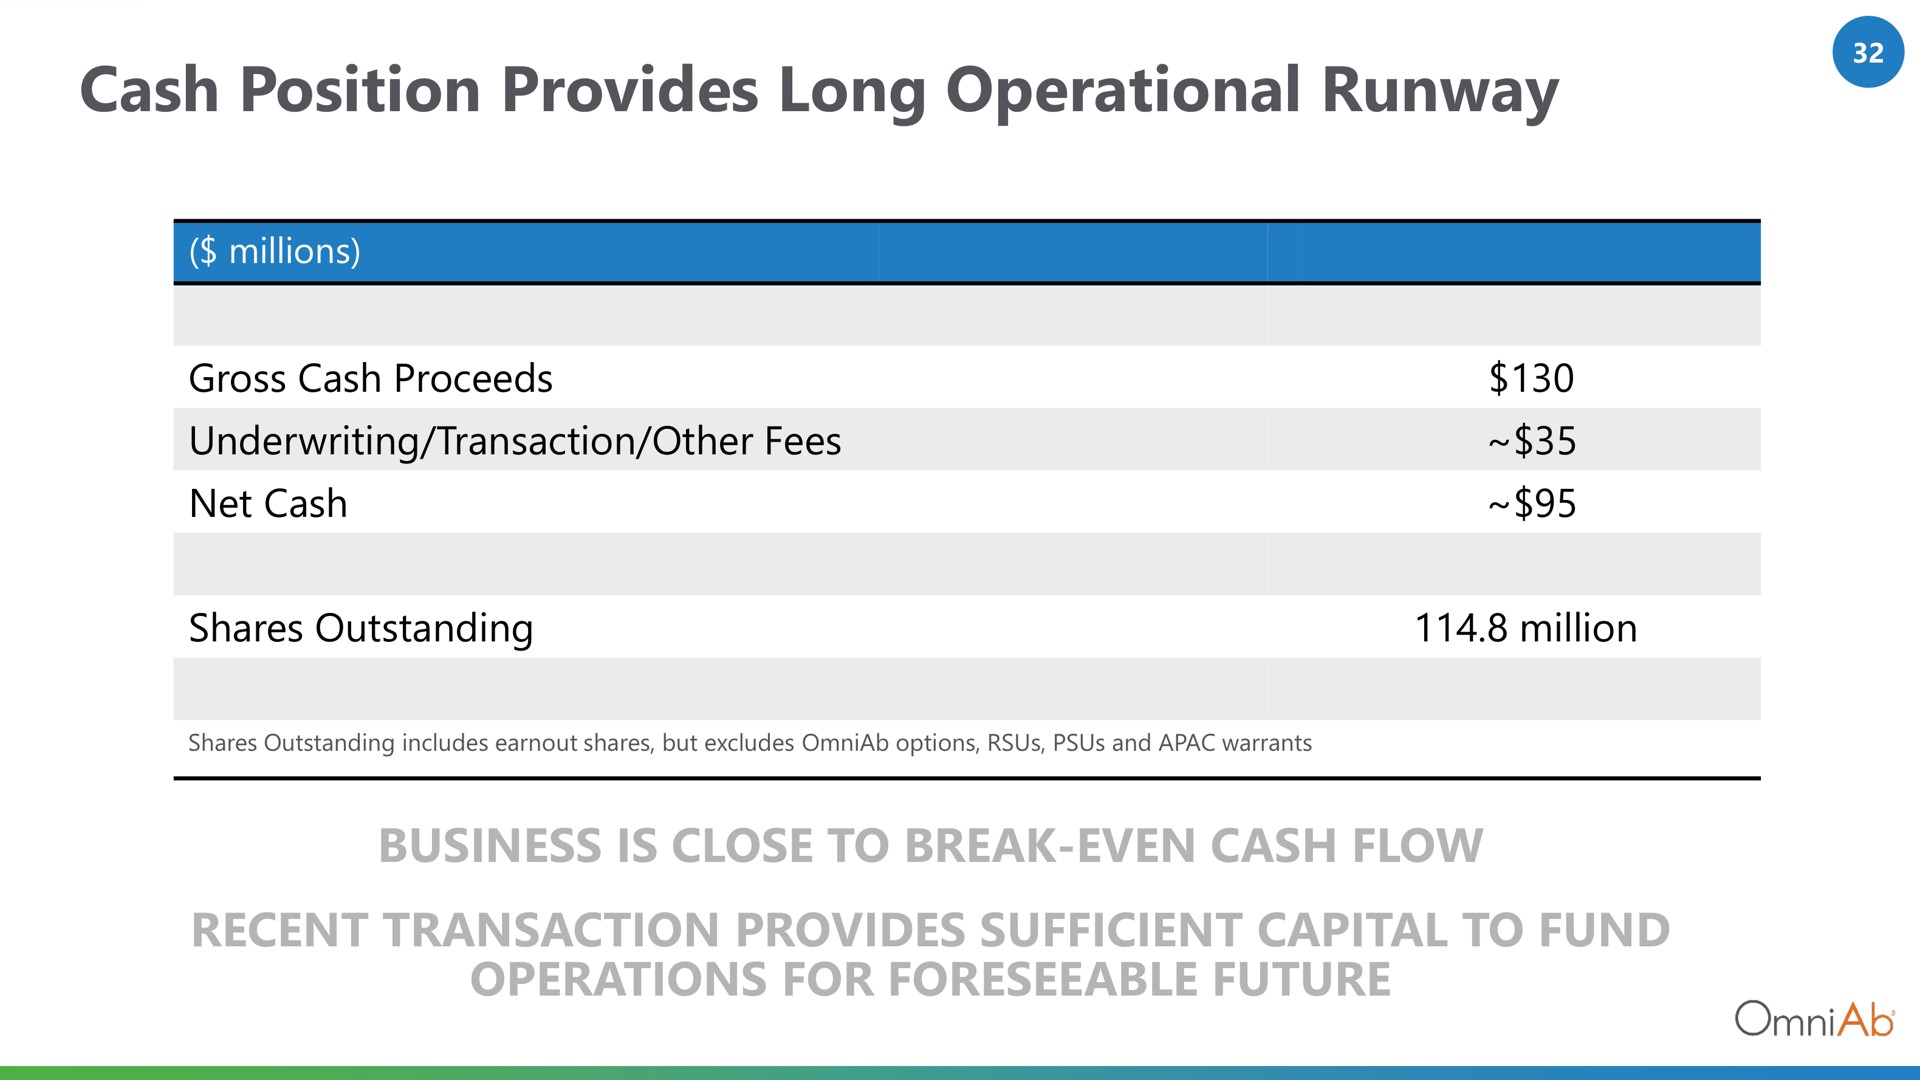 cash position provides long operational runway business is close to break even cash flow recent transaction provides sufficient capital to fund operations for foreseeable future | OmniAb